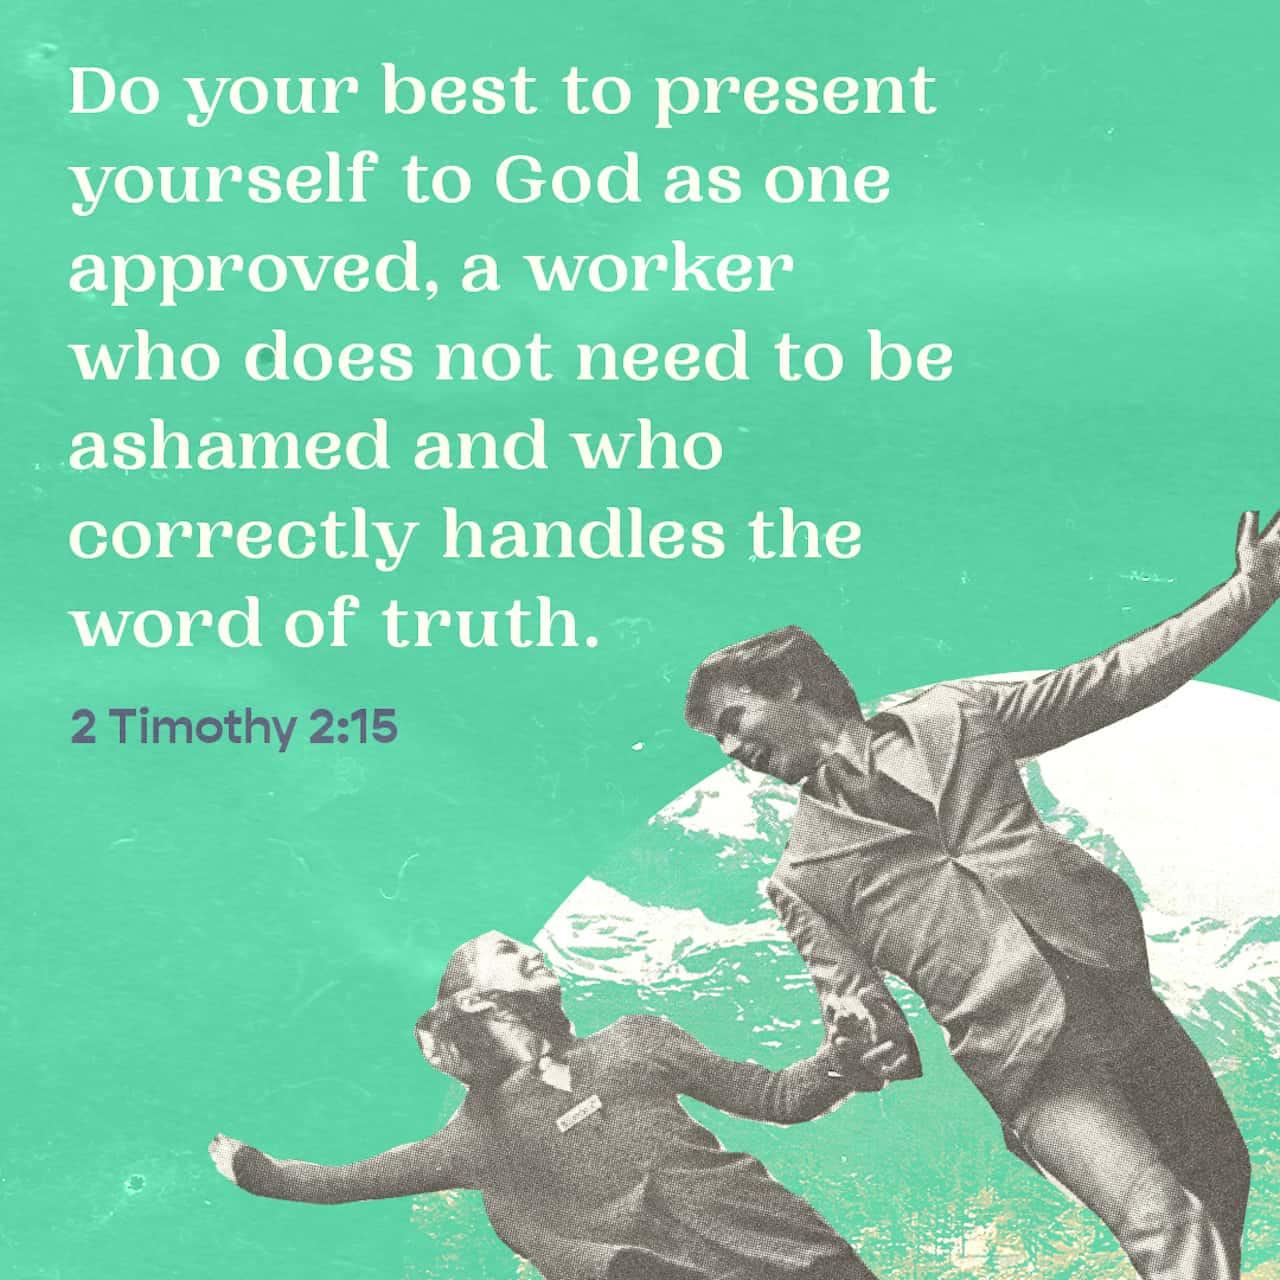 Bible Verse of the Day - day 154 - image 62604 (2 Timothy 2:14-26)